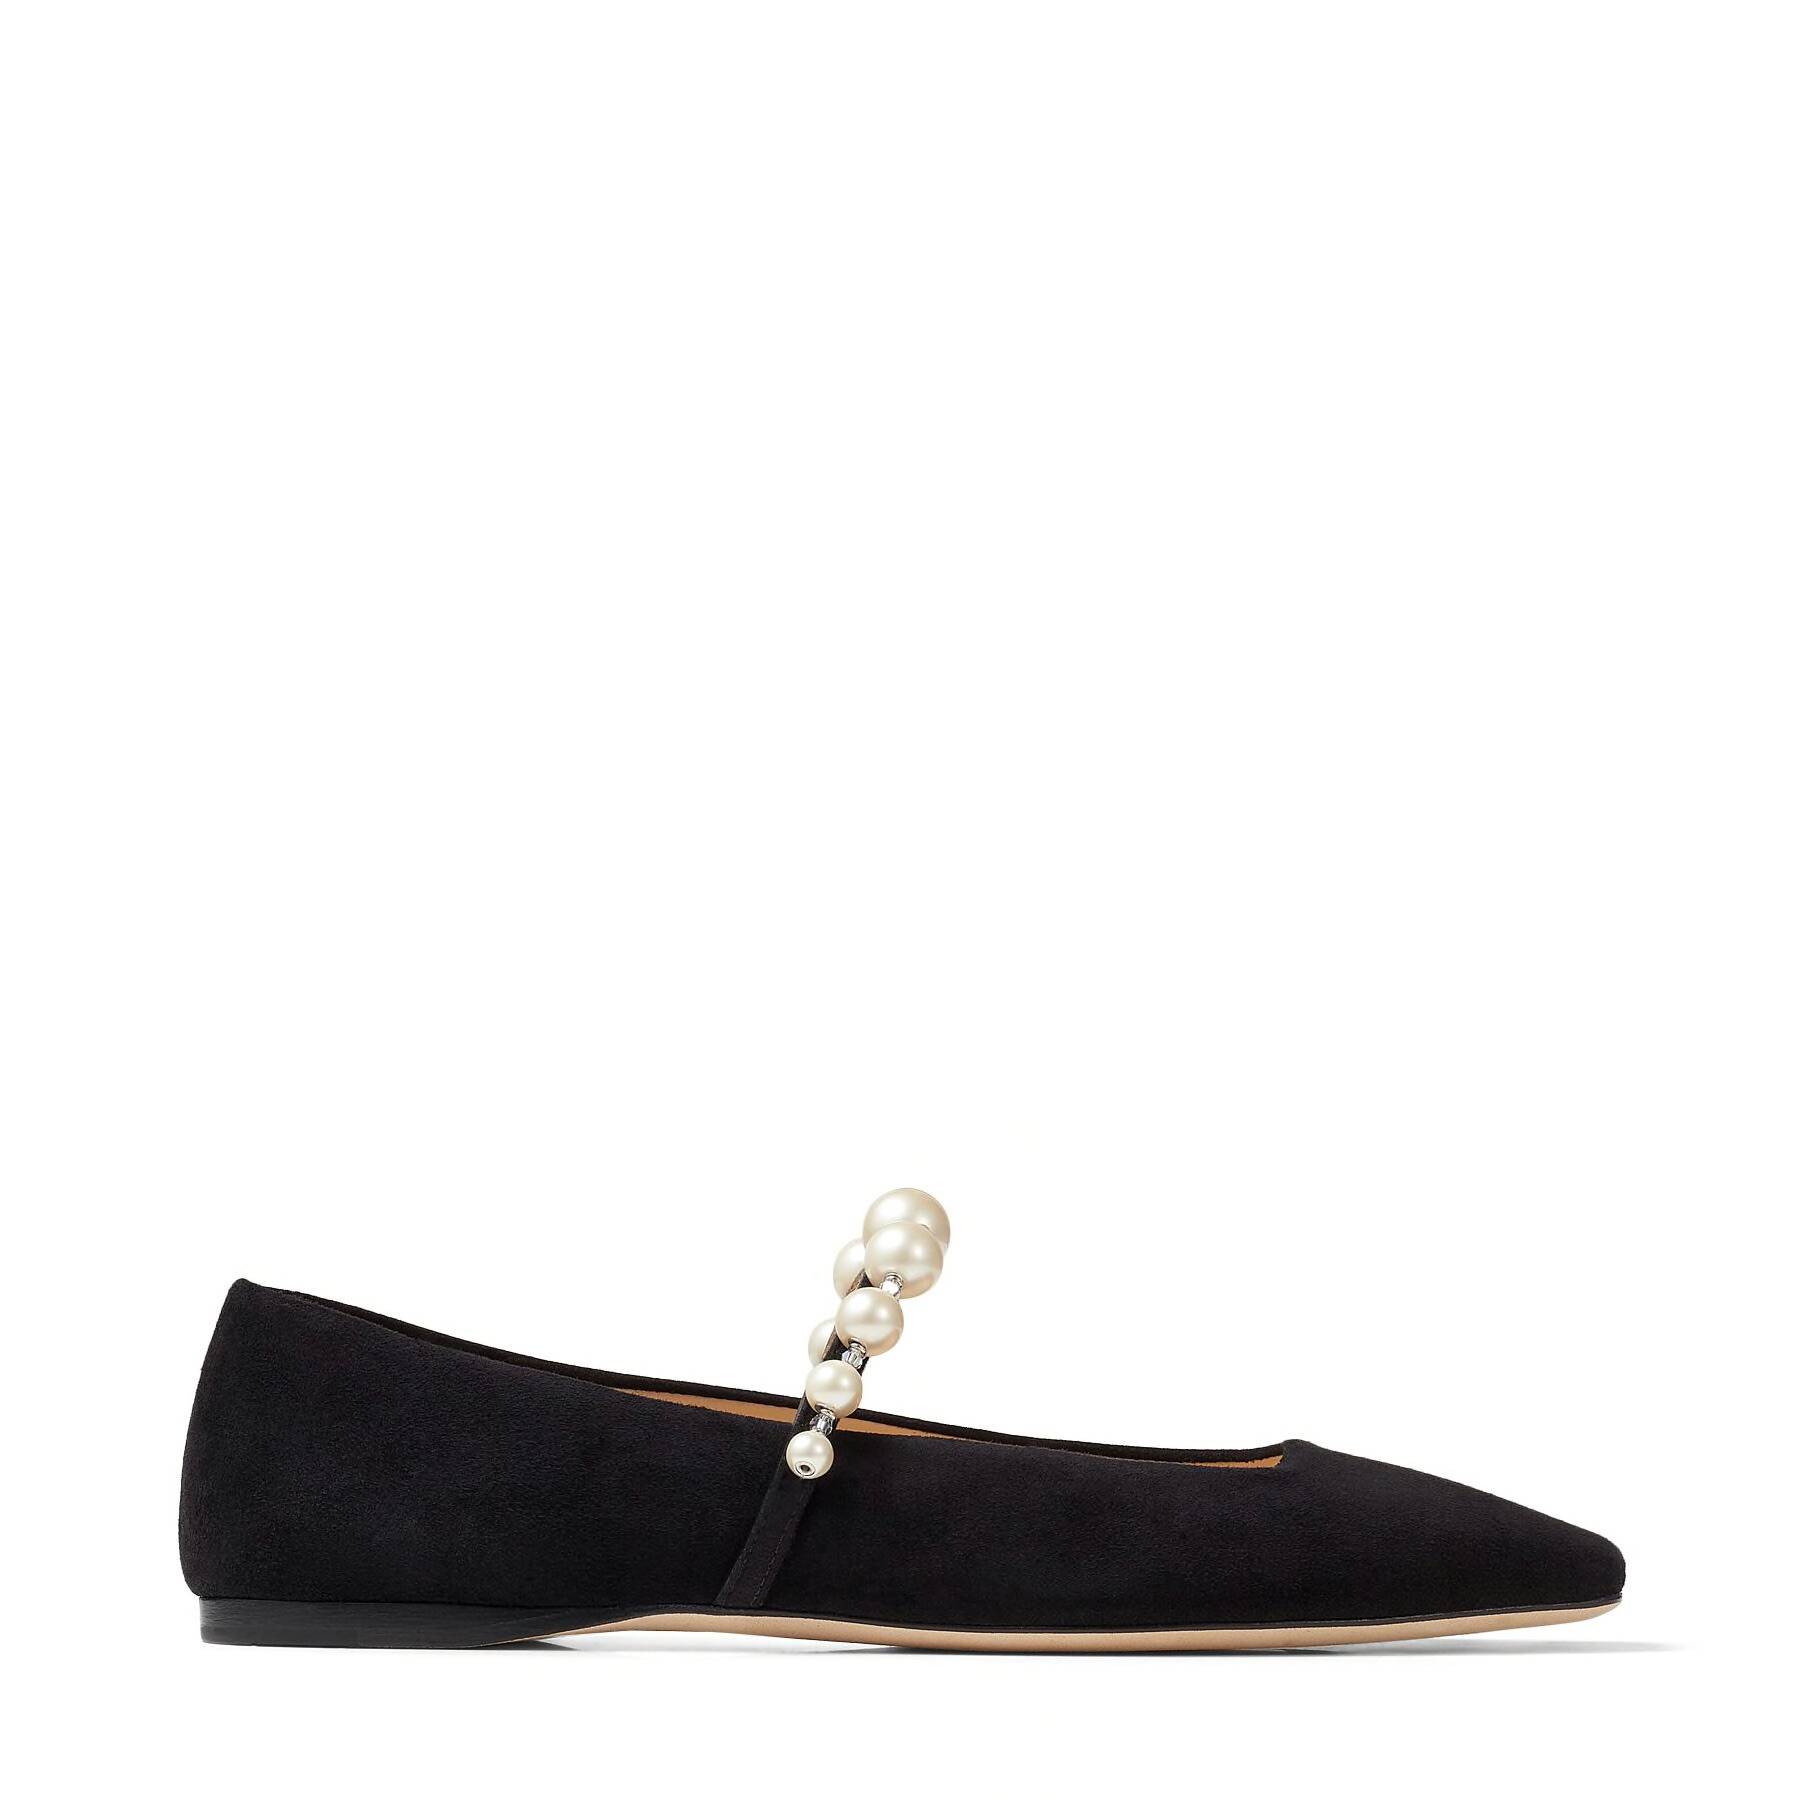 The 25 Best Ballet Flats That Look the Chic French Part | Who What Wear UK